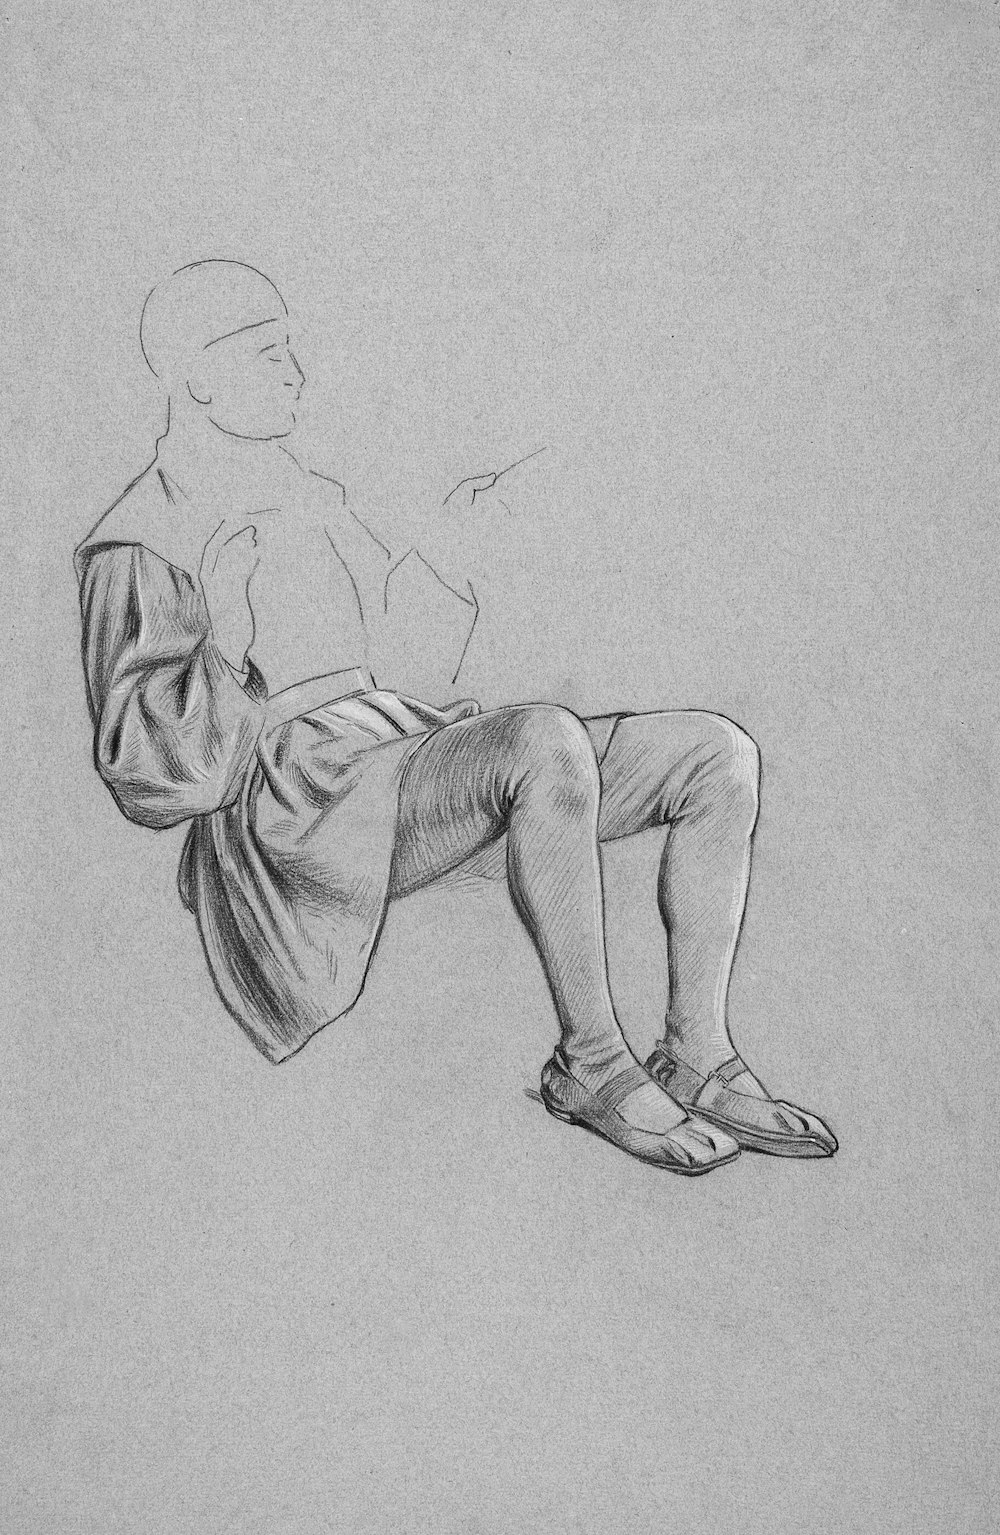 a drawing of a person sitting on the ground